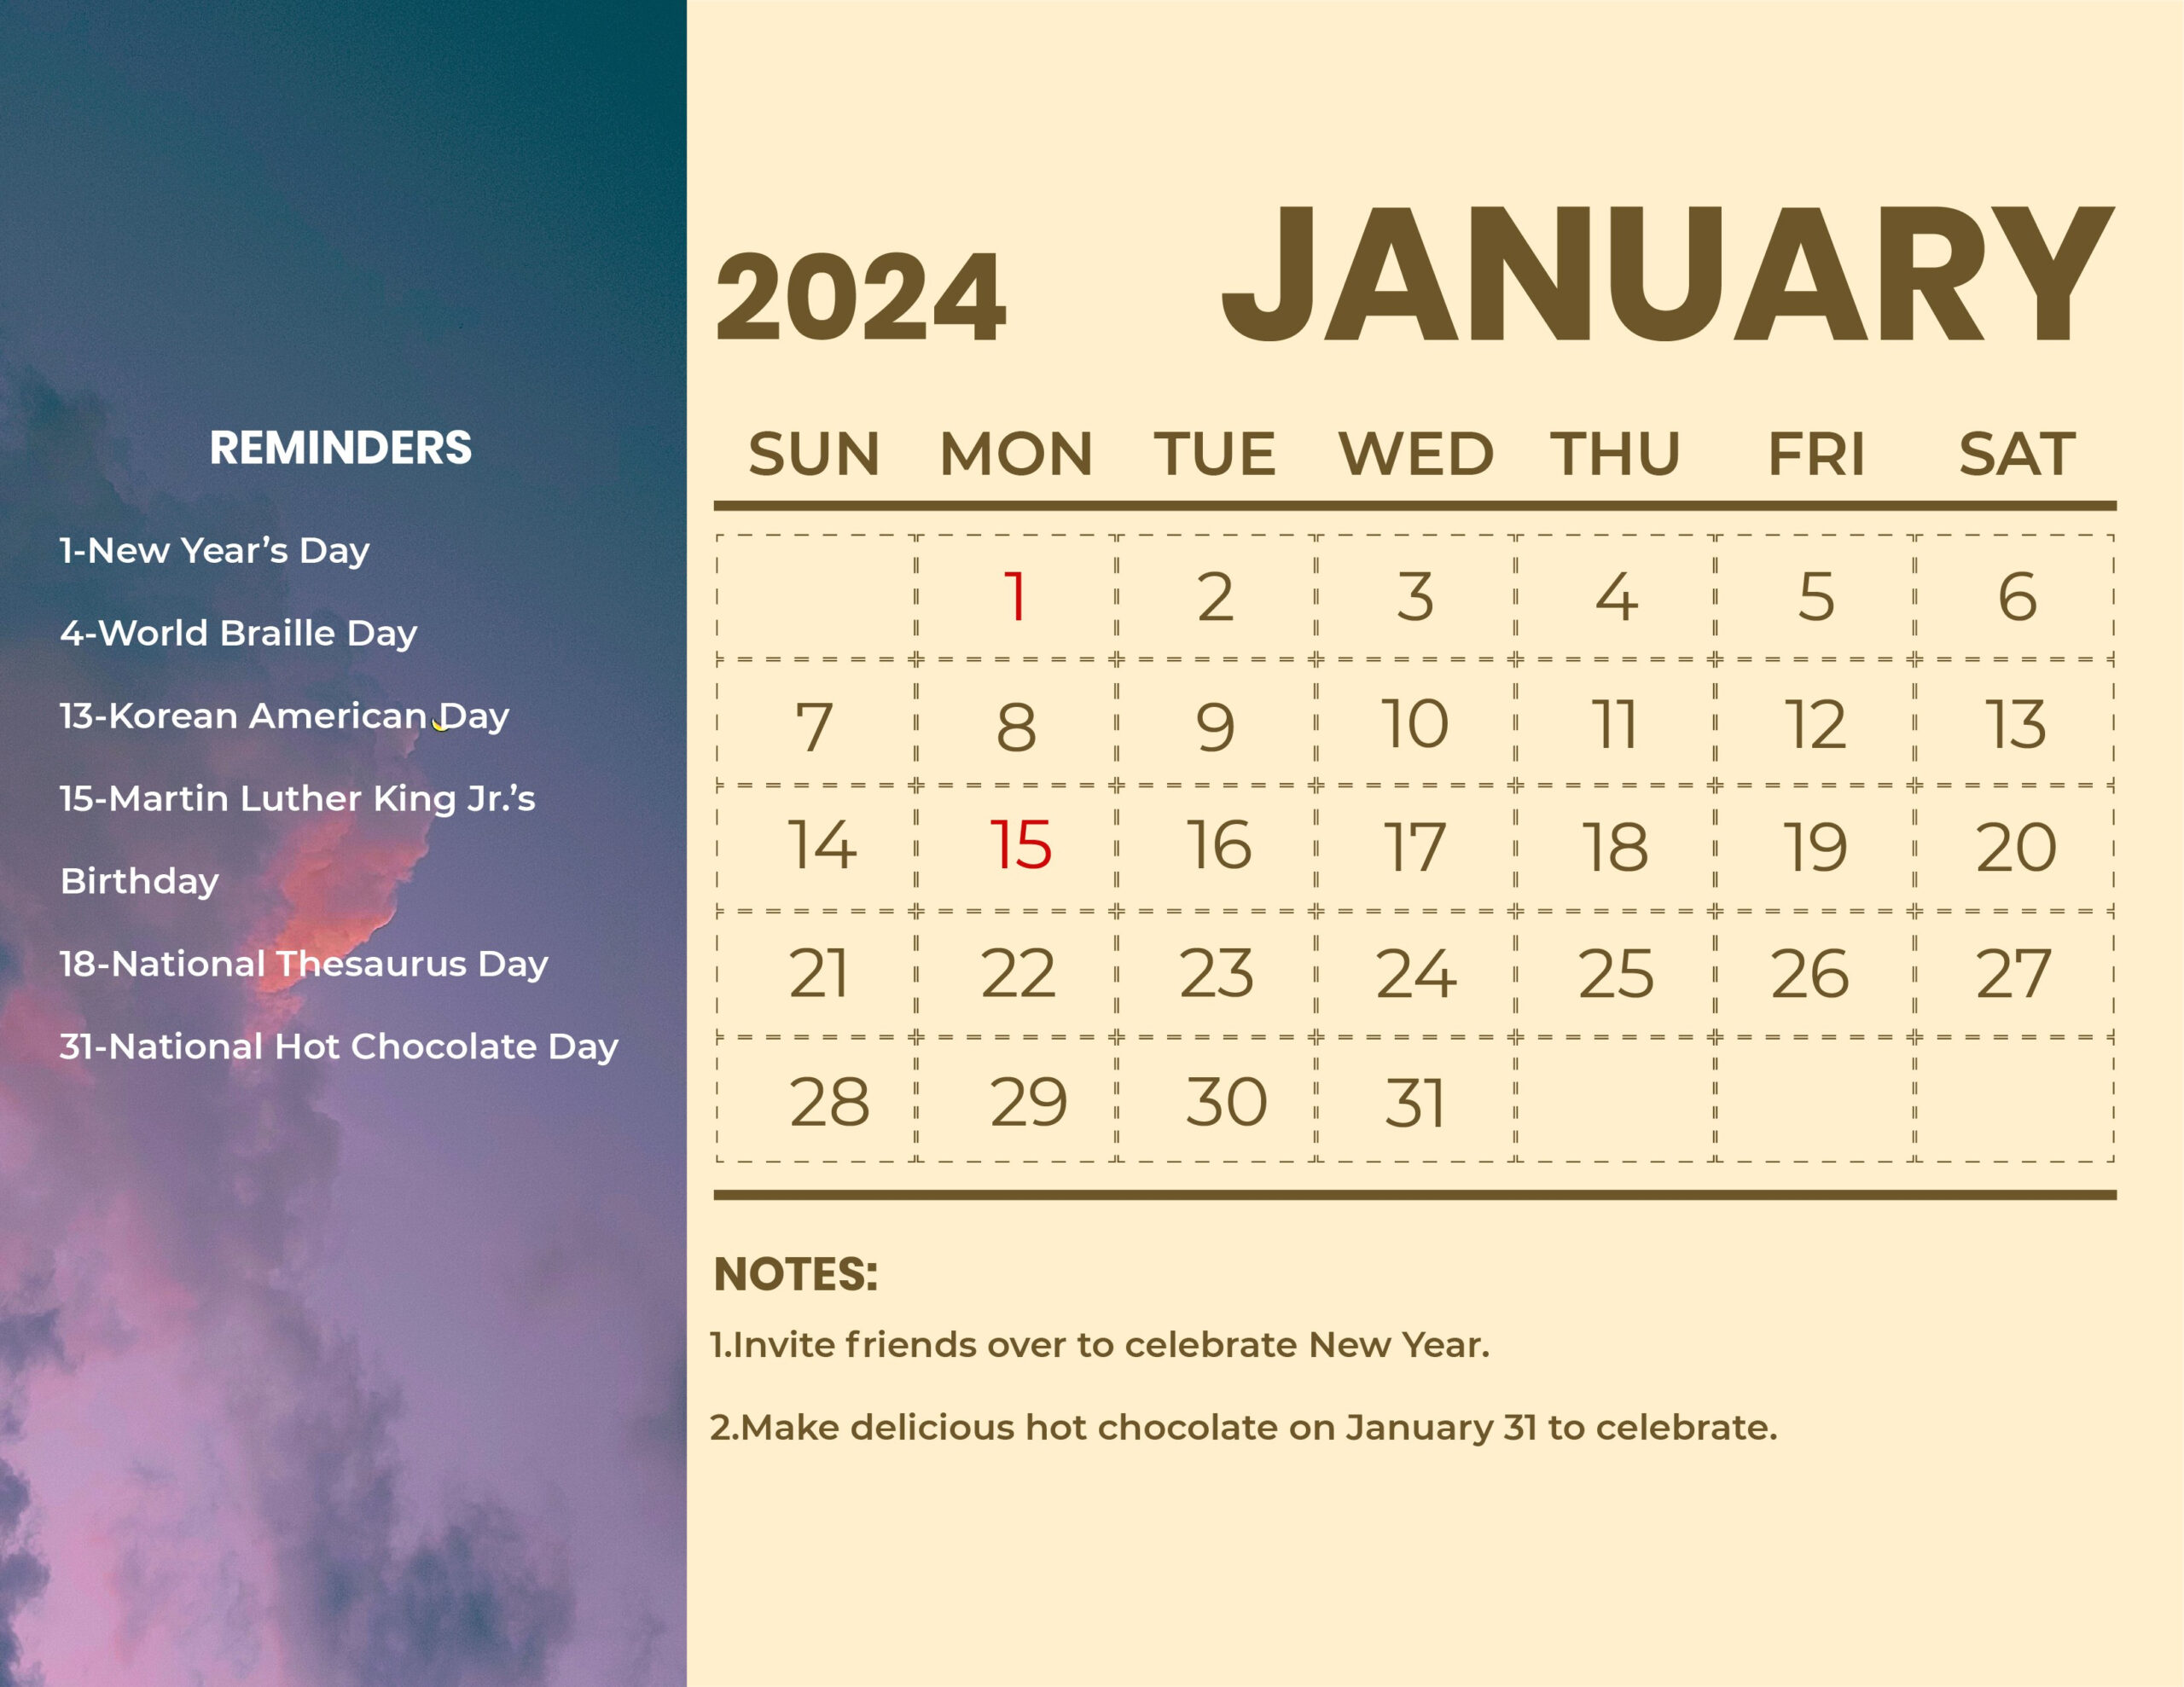 January 2024 Calendar With Holidays - Download In Word for January 2024 Calendar With Holidays Free Printable